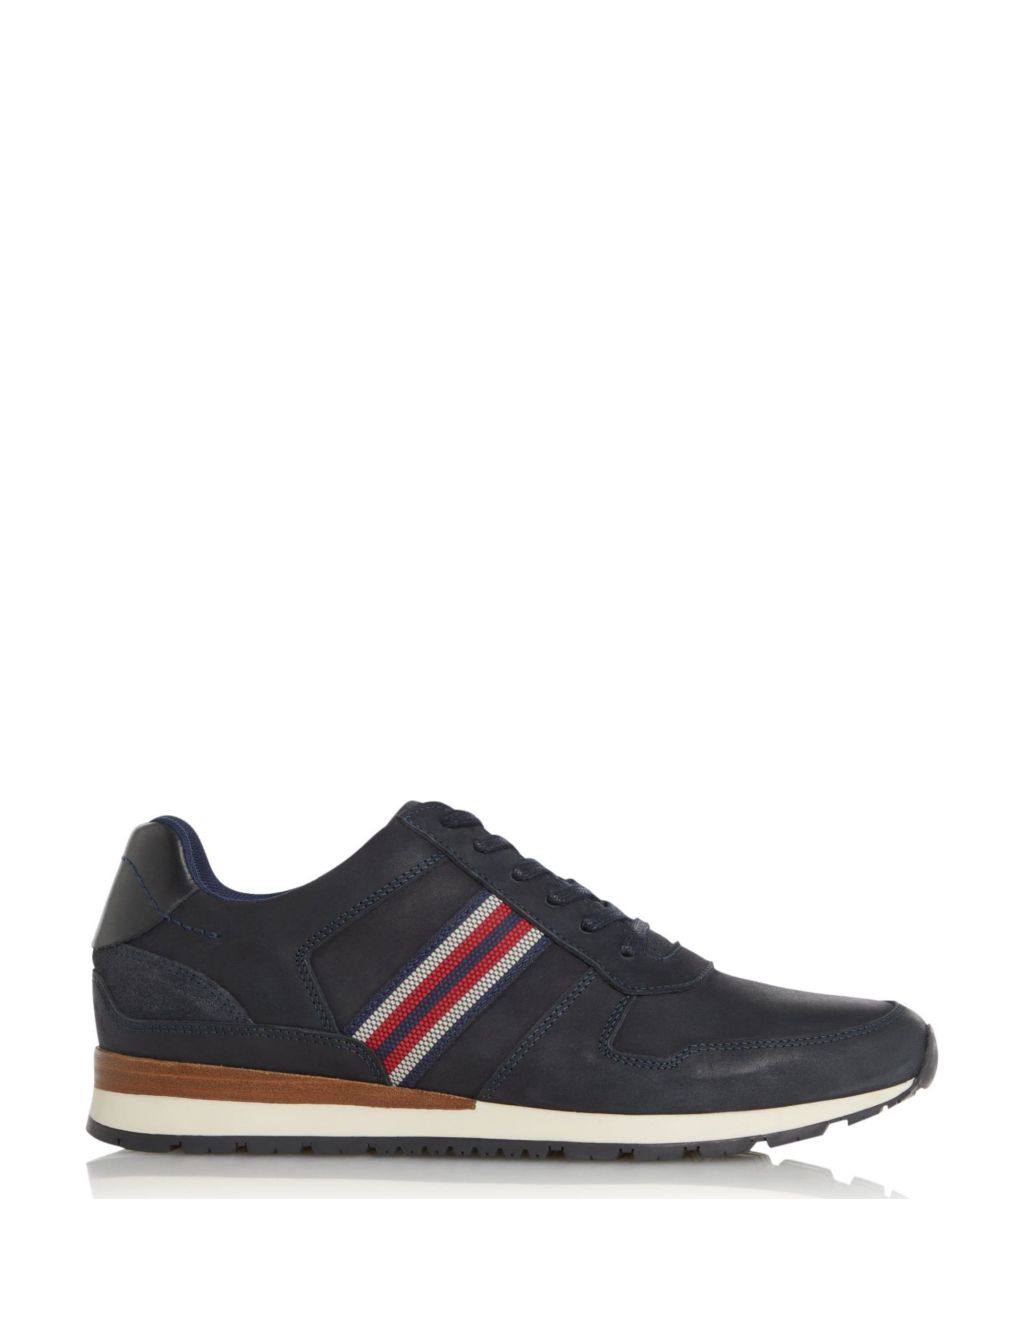 Leather Lace Up Side Stripe Trainers image 1